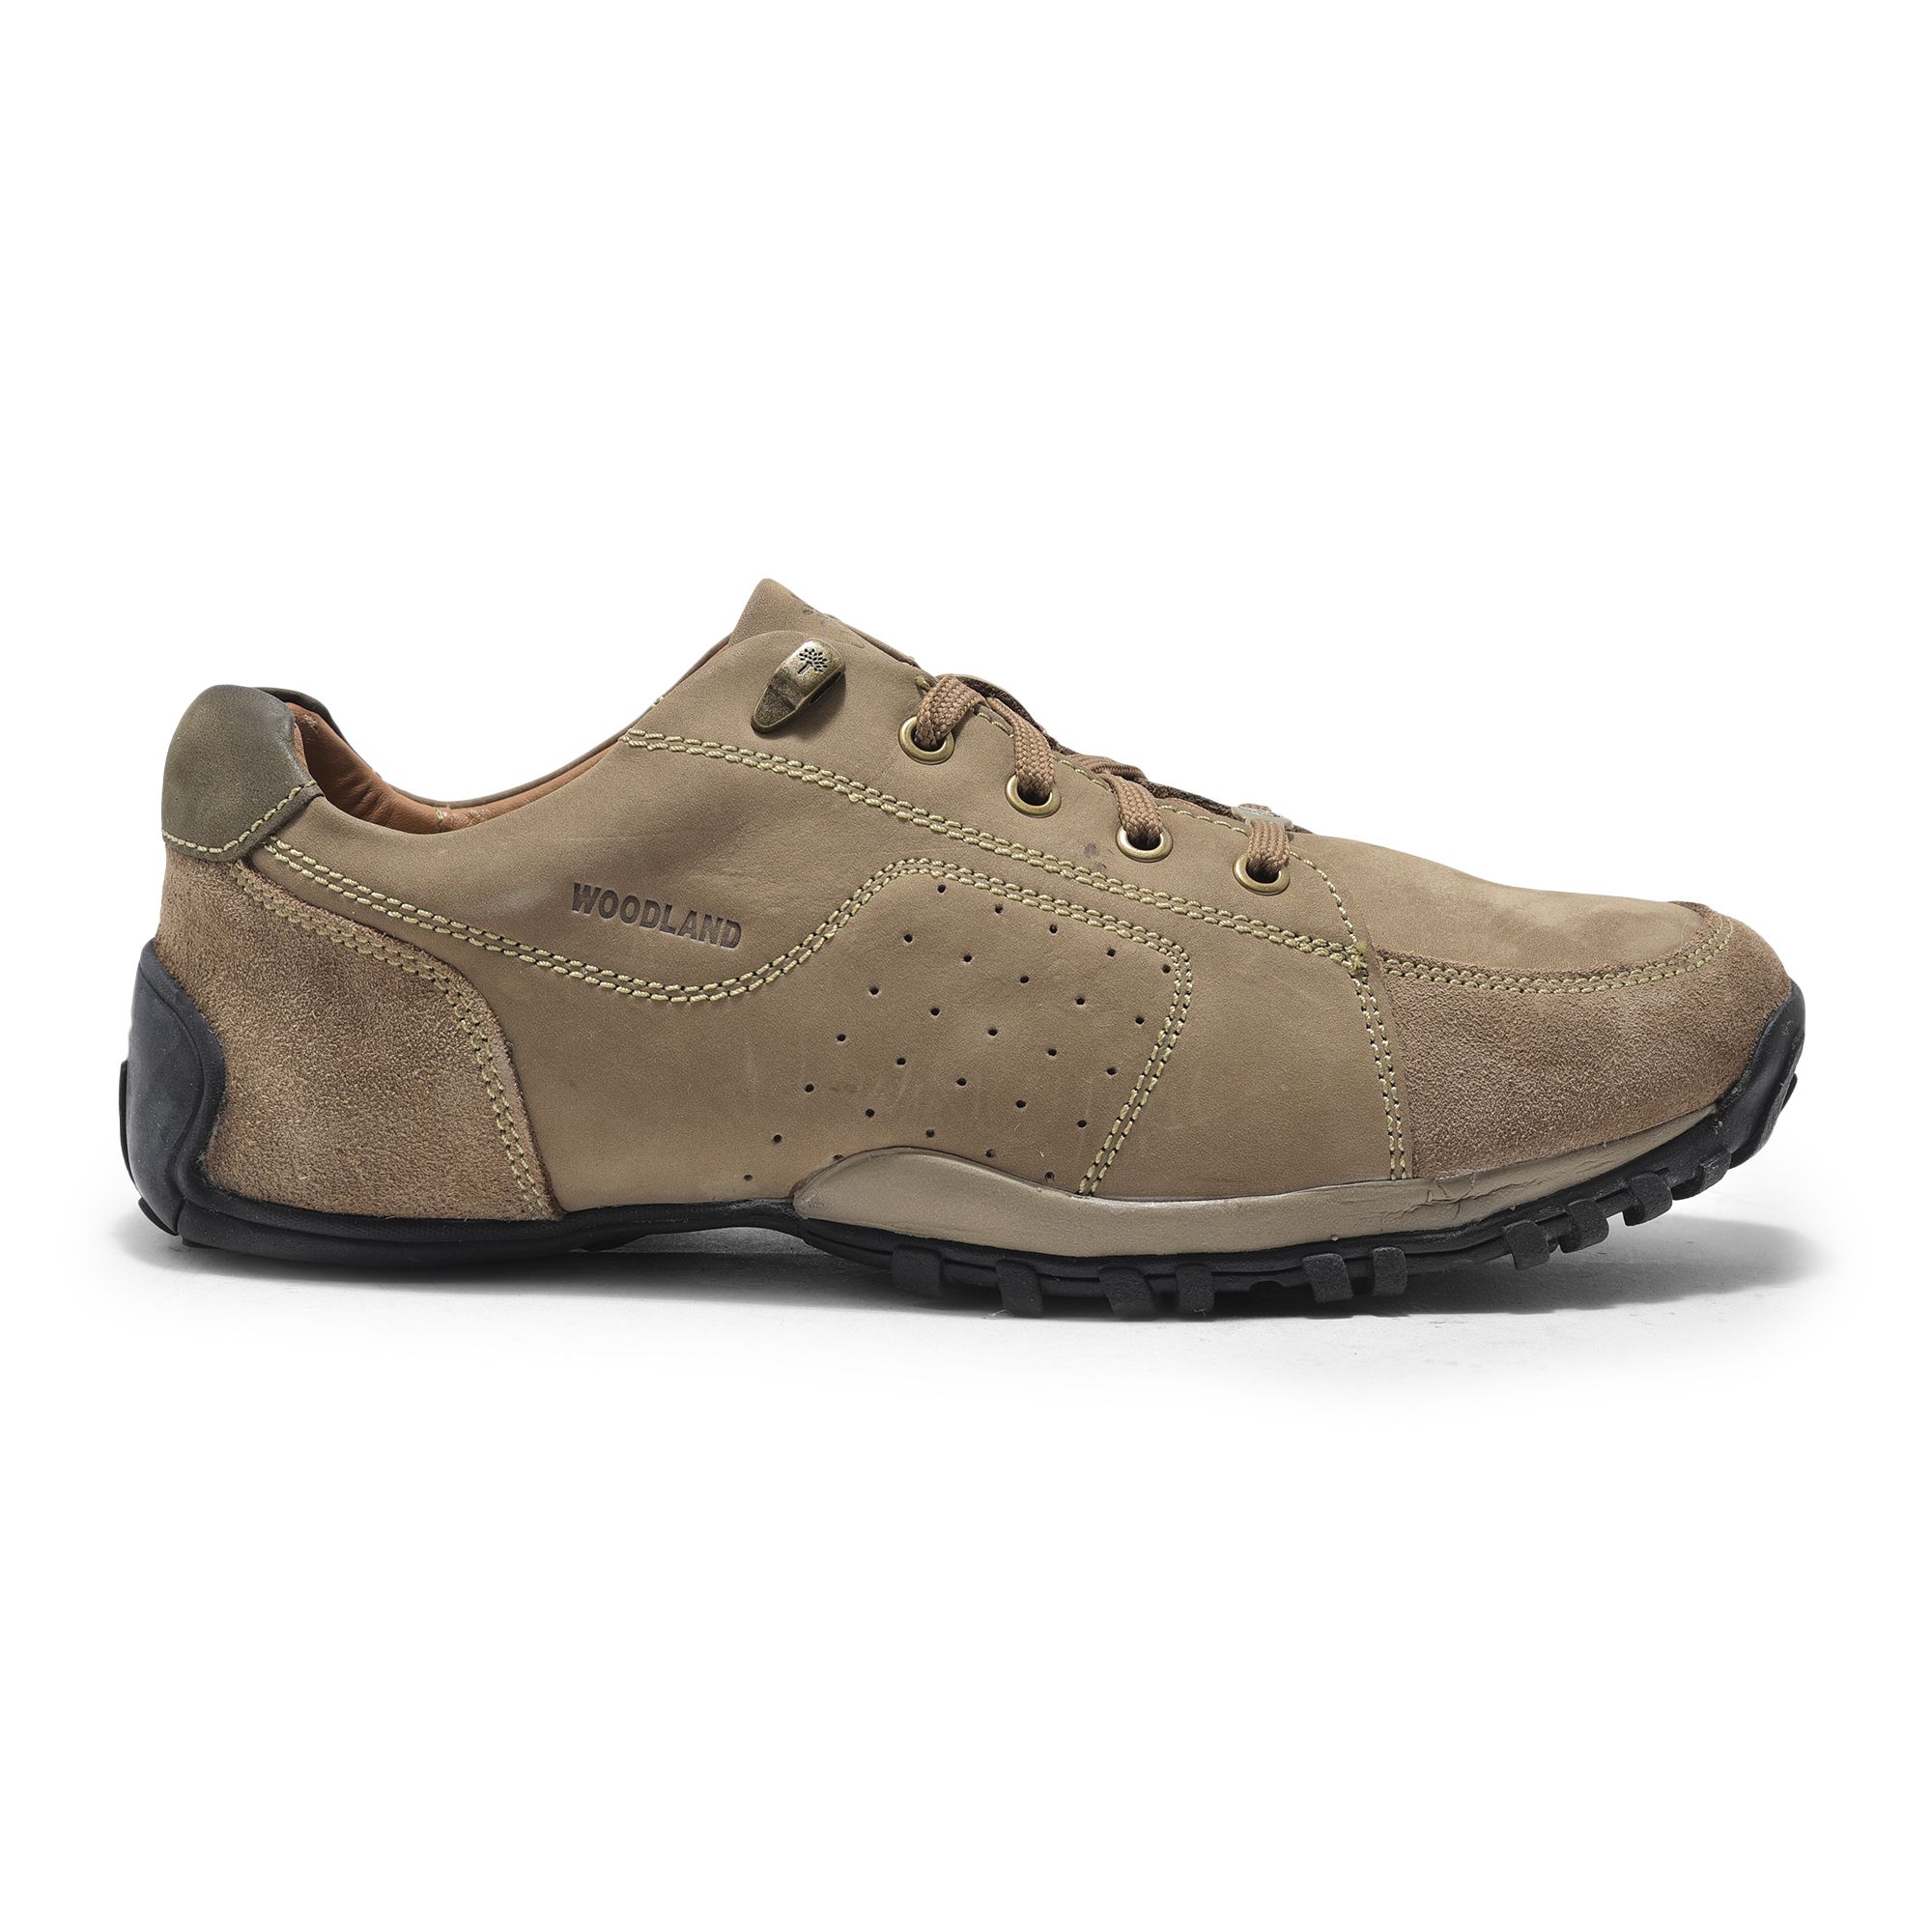 Buy Woodland Men's Camel Leather Sneakers -11 UK/India (45 EU)(GC  0232106Y15) at Amazon.in